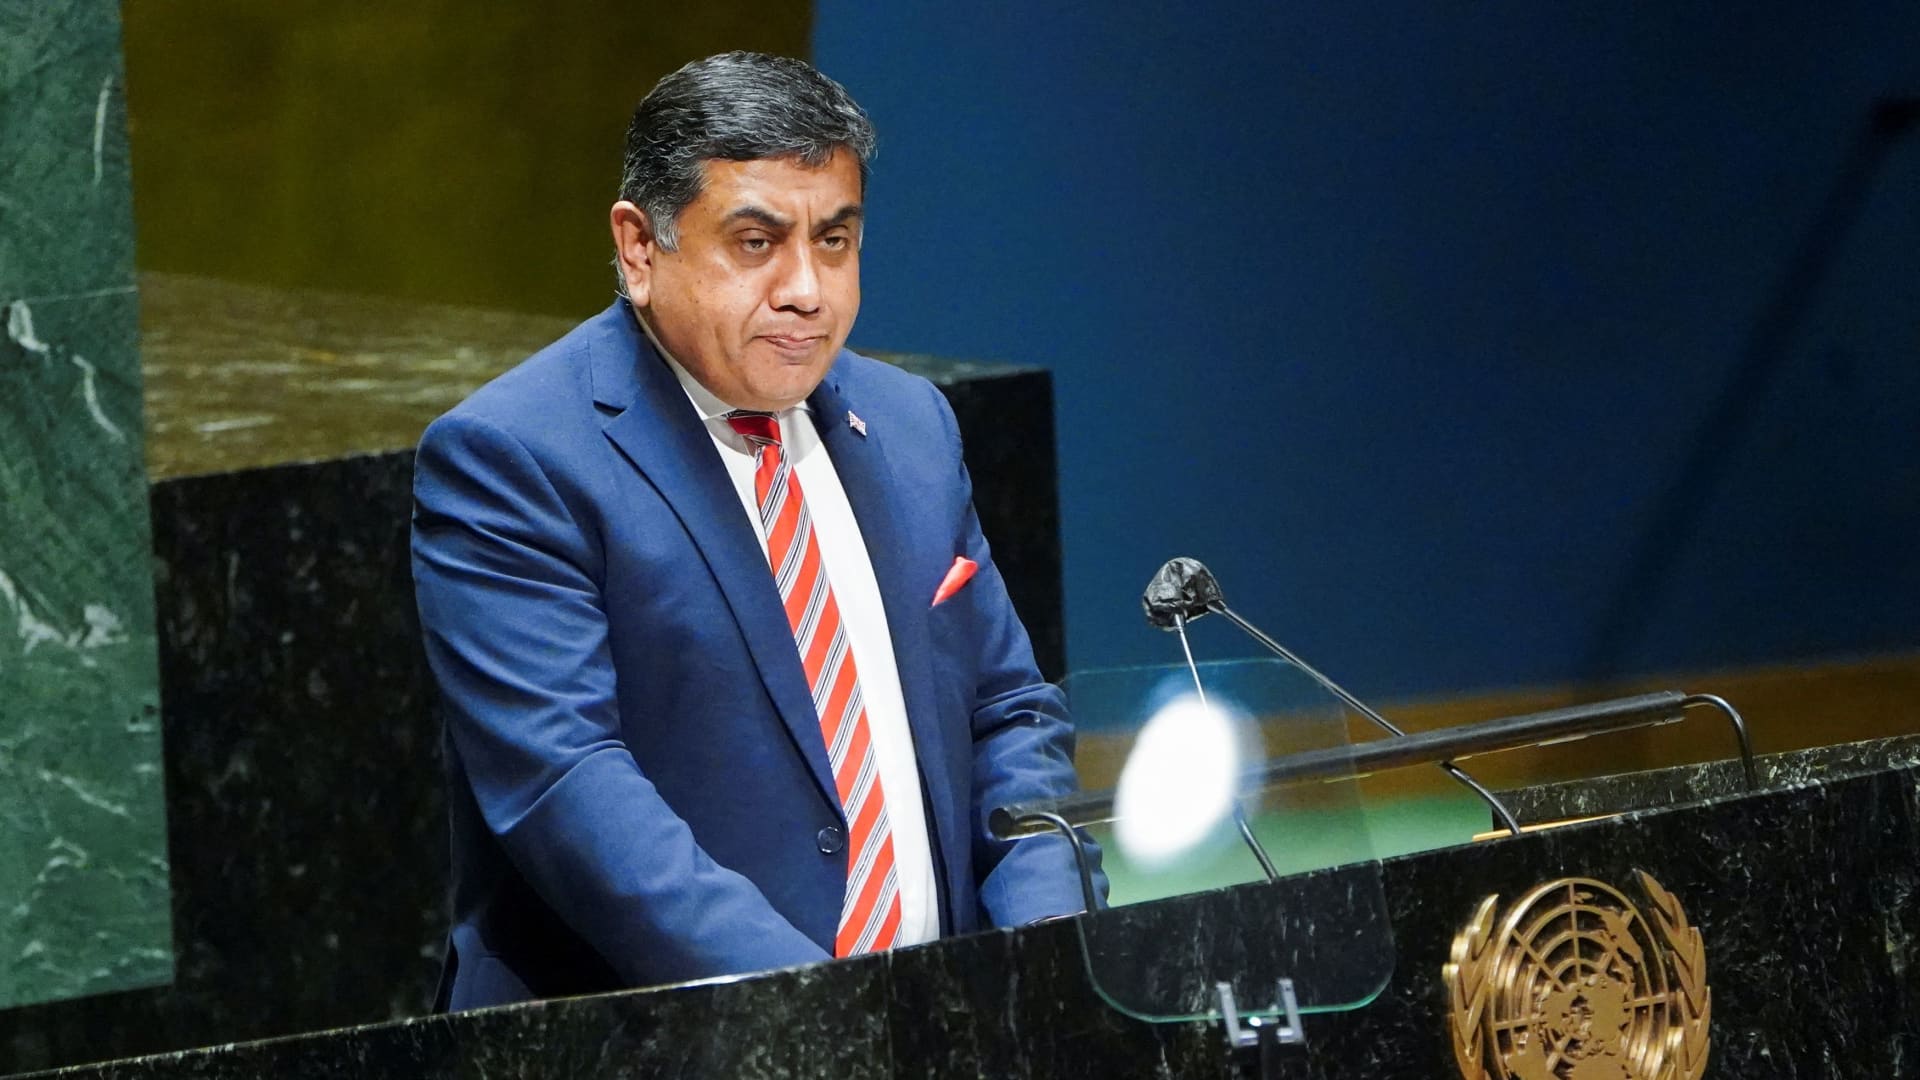 Britain's Minister of State for the Commonwealth Tariq Ahmad speaks during a meeting of the U.N. General Assembly on the situation between Russia and Ukraine, at the United Nations Headquarters in Manhattan, New York City, U.S., February 23, 2022.